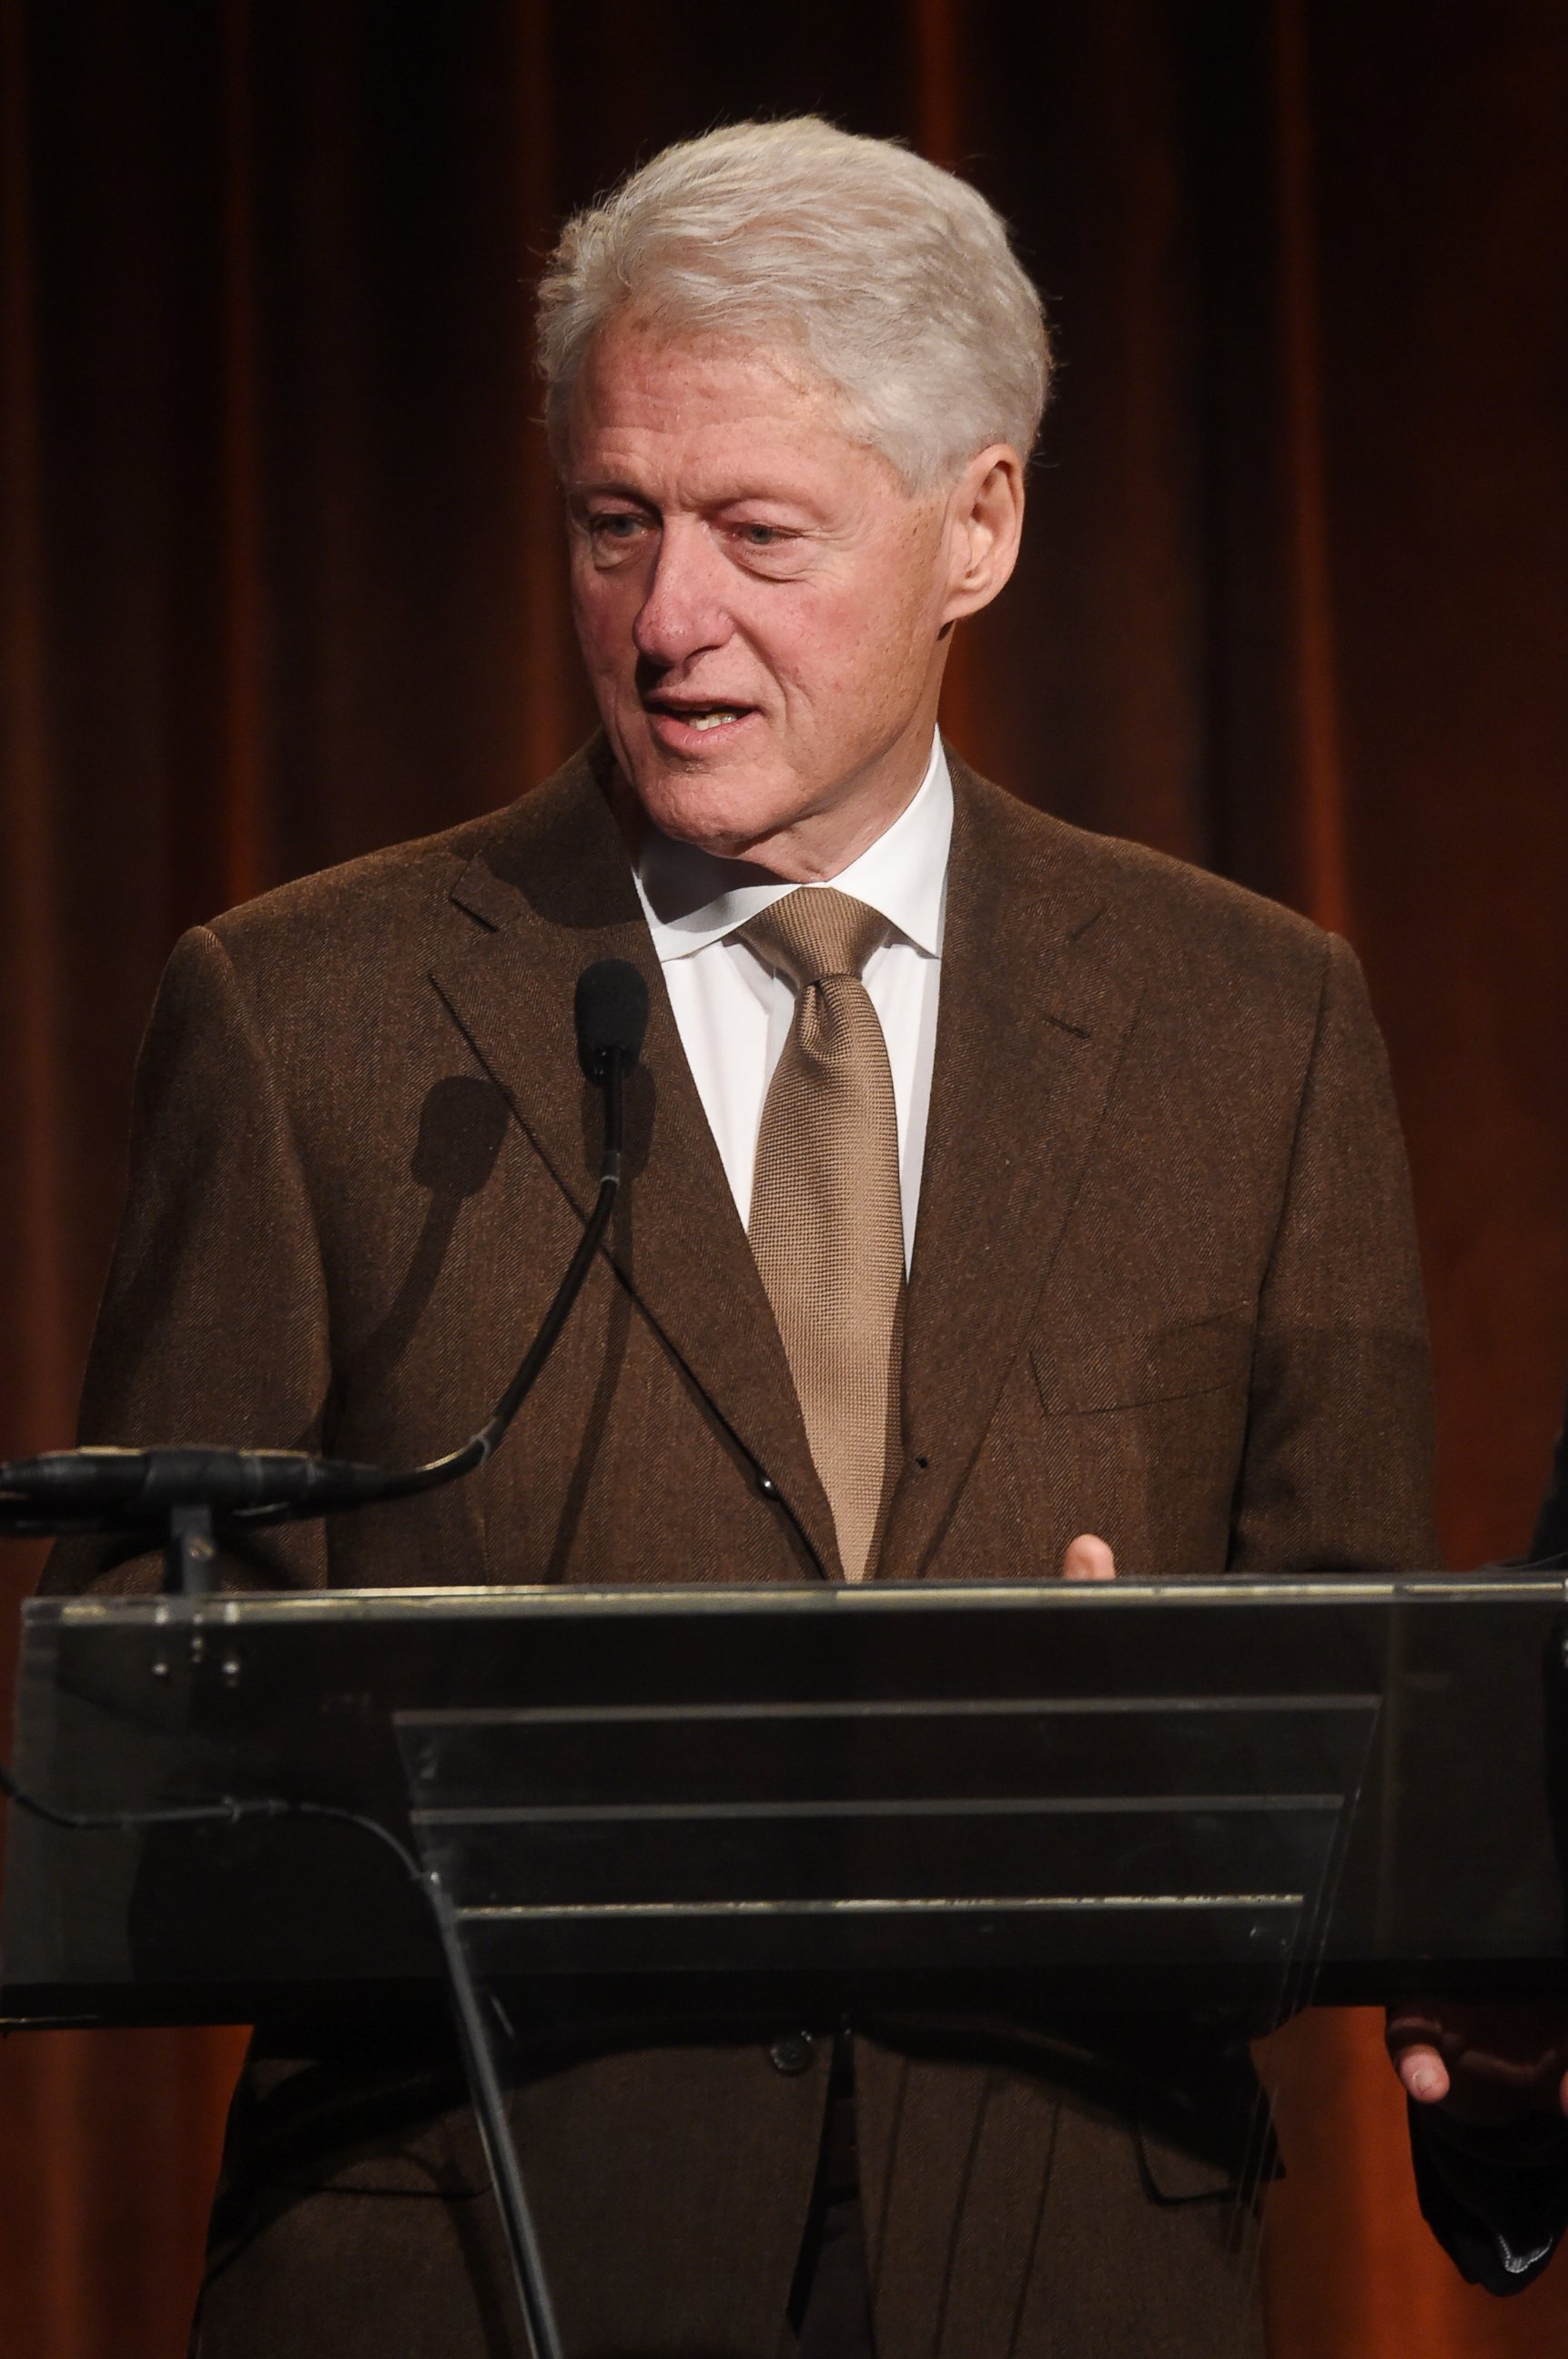 PHOTO: Bill Clinton speaks on stage at the Food Bank for New York City Can-Do Awards Dinner 2017, April 19, 2017. in New York.